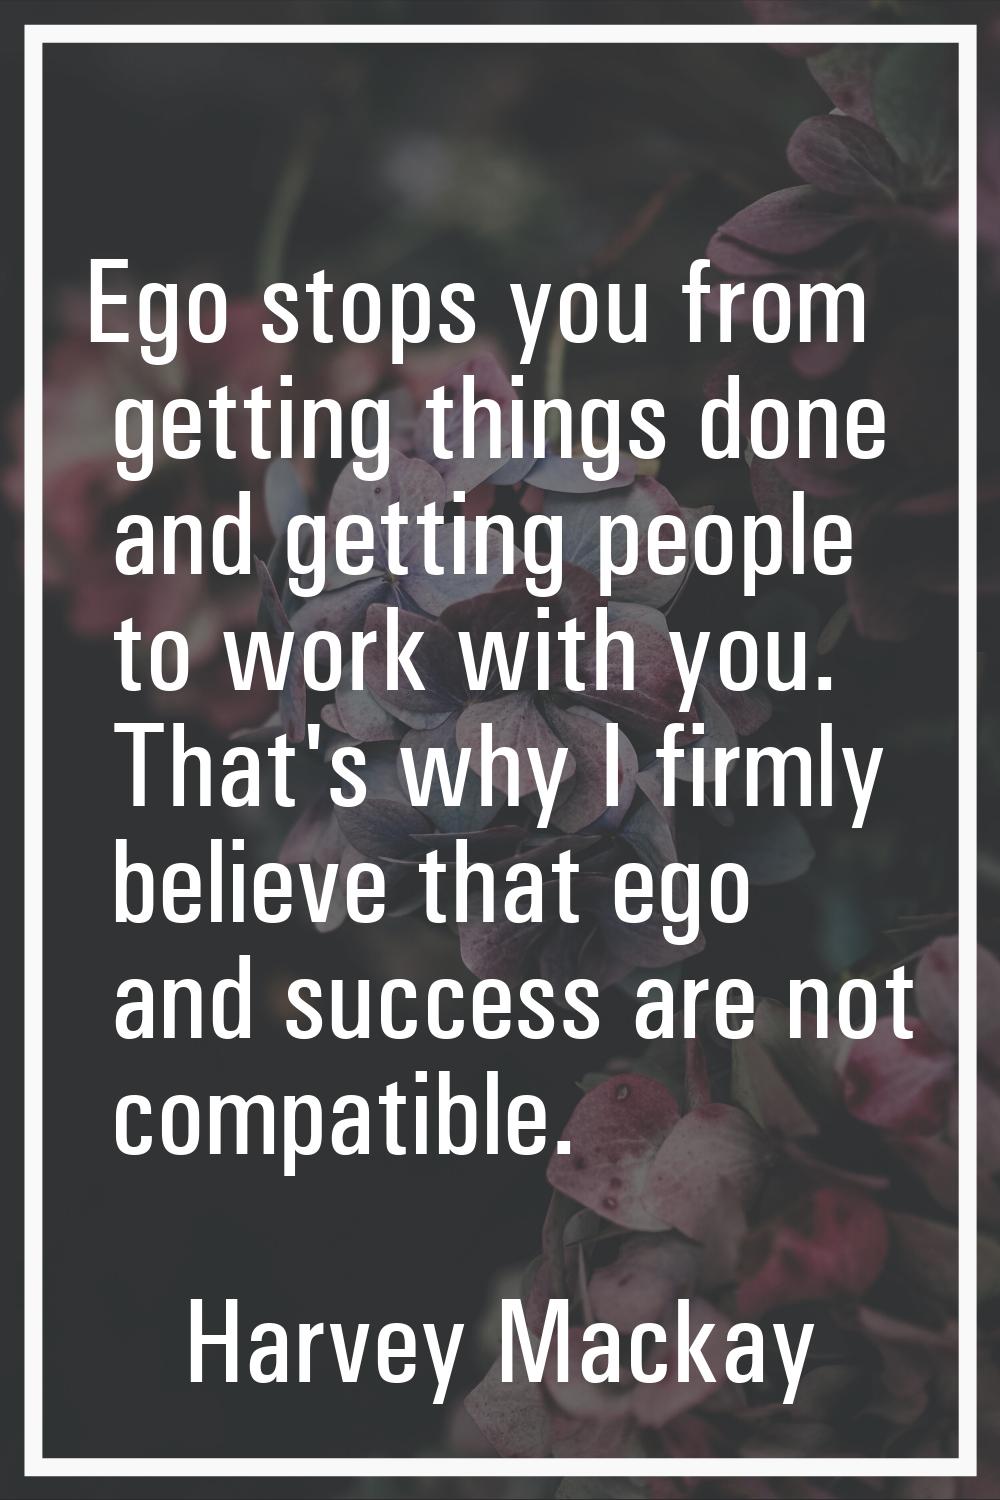 Ego stops you from getting things done and getting people to work with you. That's why I firmly bel